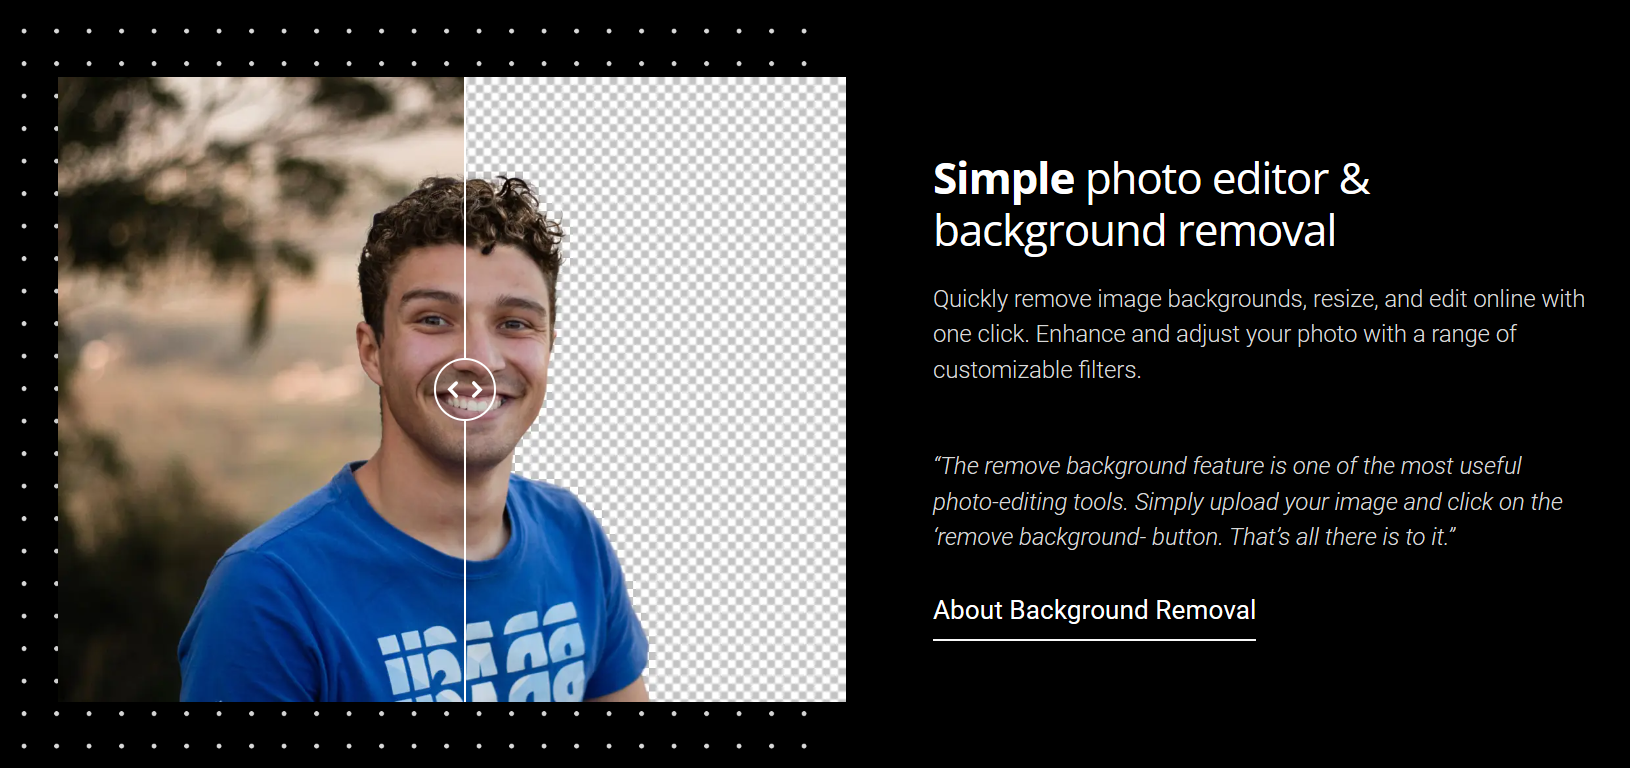 Simple image editor & background removal tool